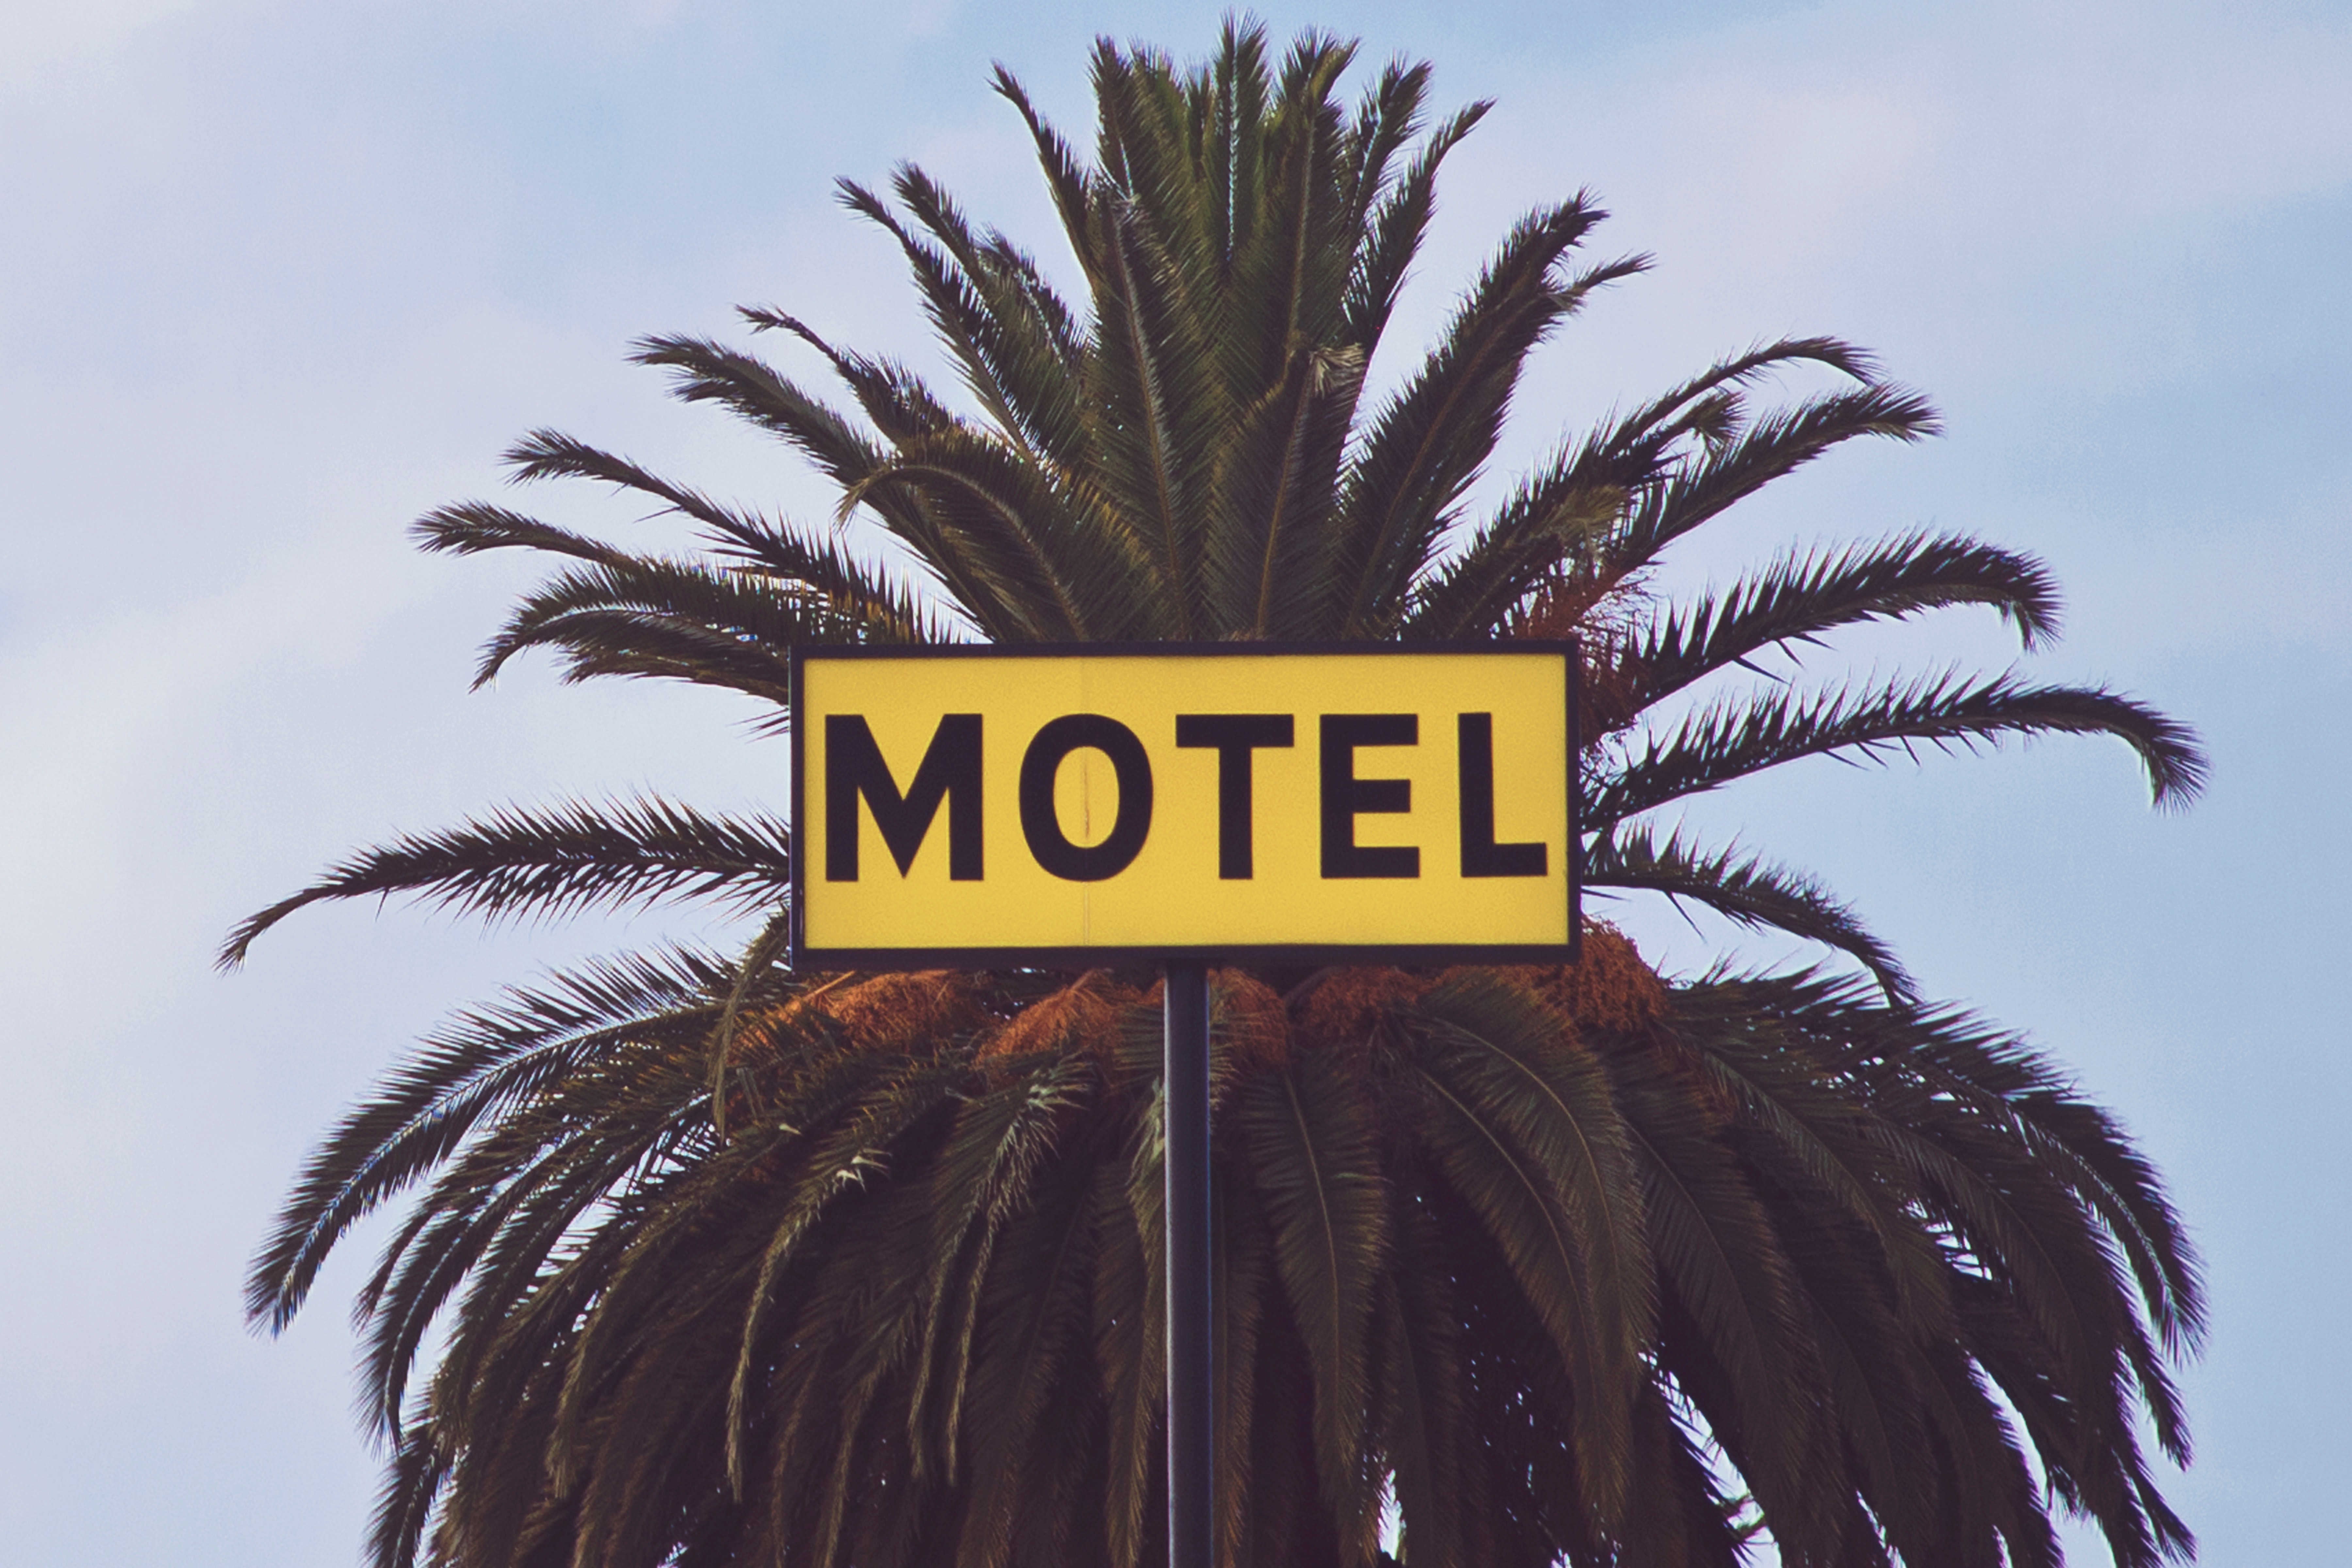 A motel sign in front of a palm tree